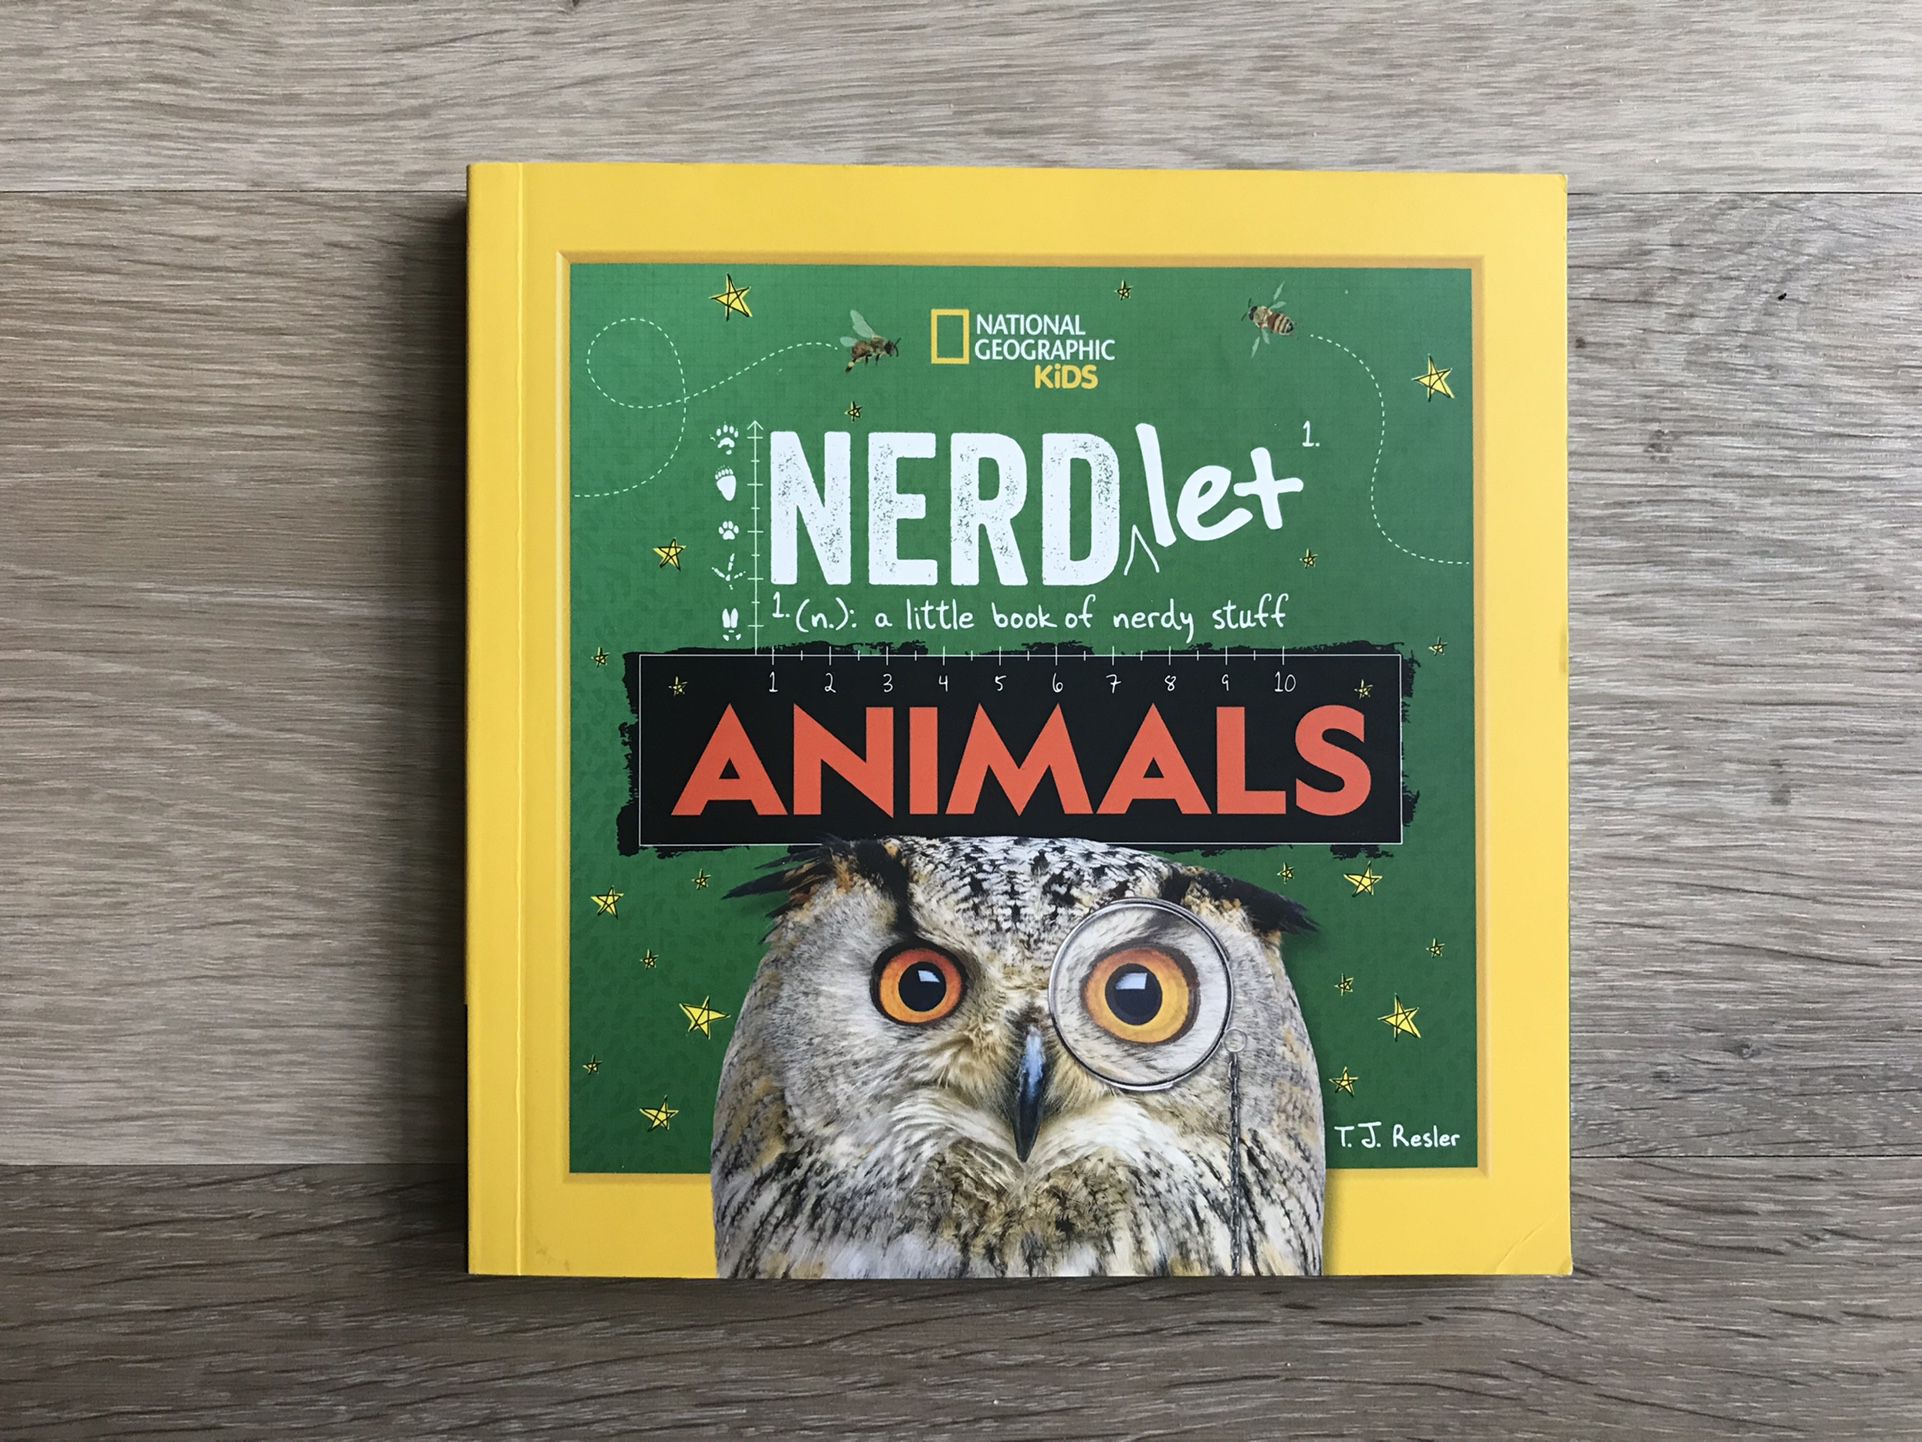 NEW National Geographic Kids Nerdlet Animals Facts Non-fiction Book Storybook Nerd Let 